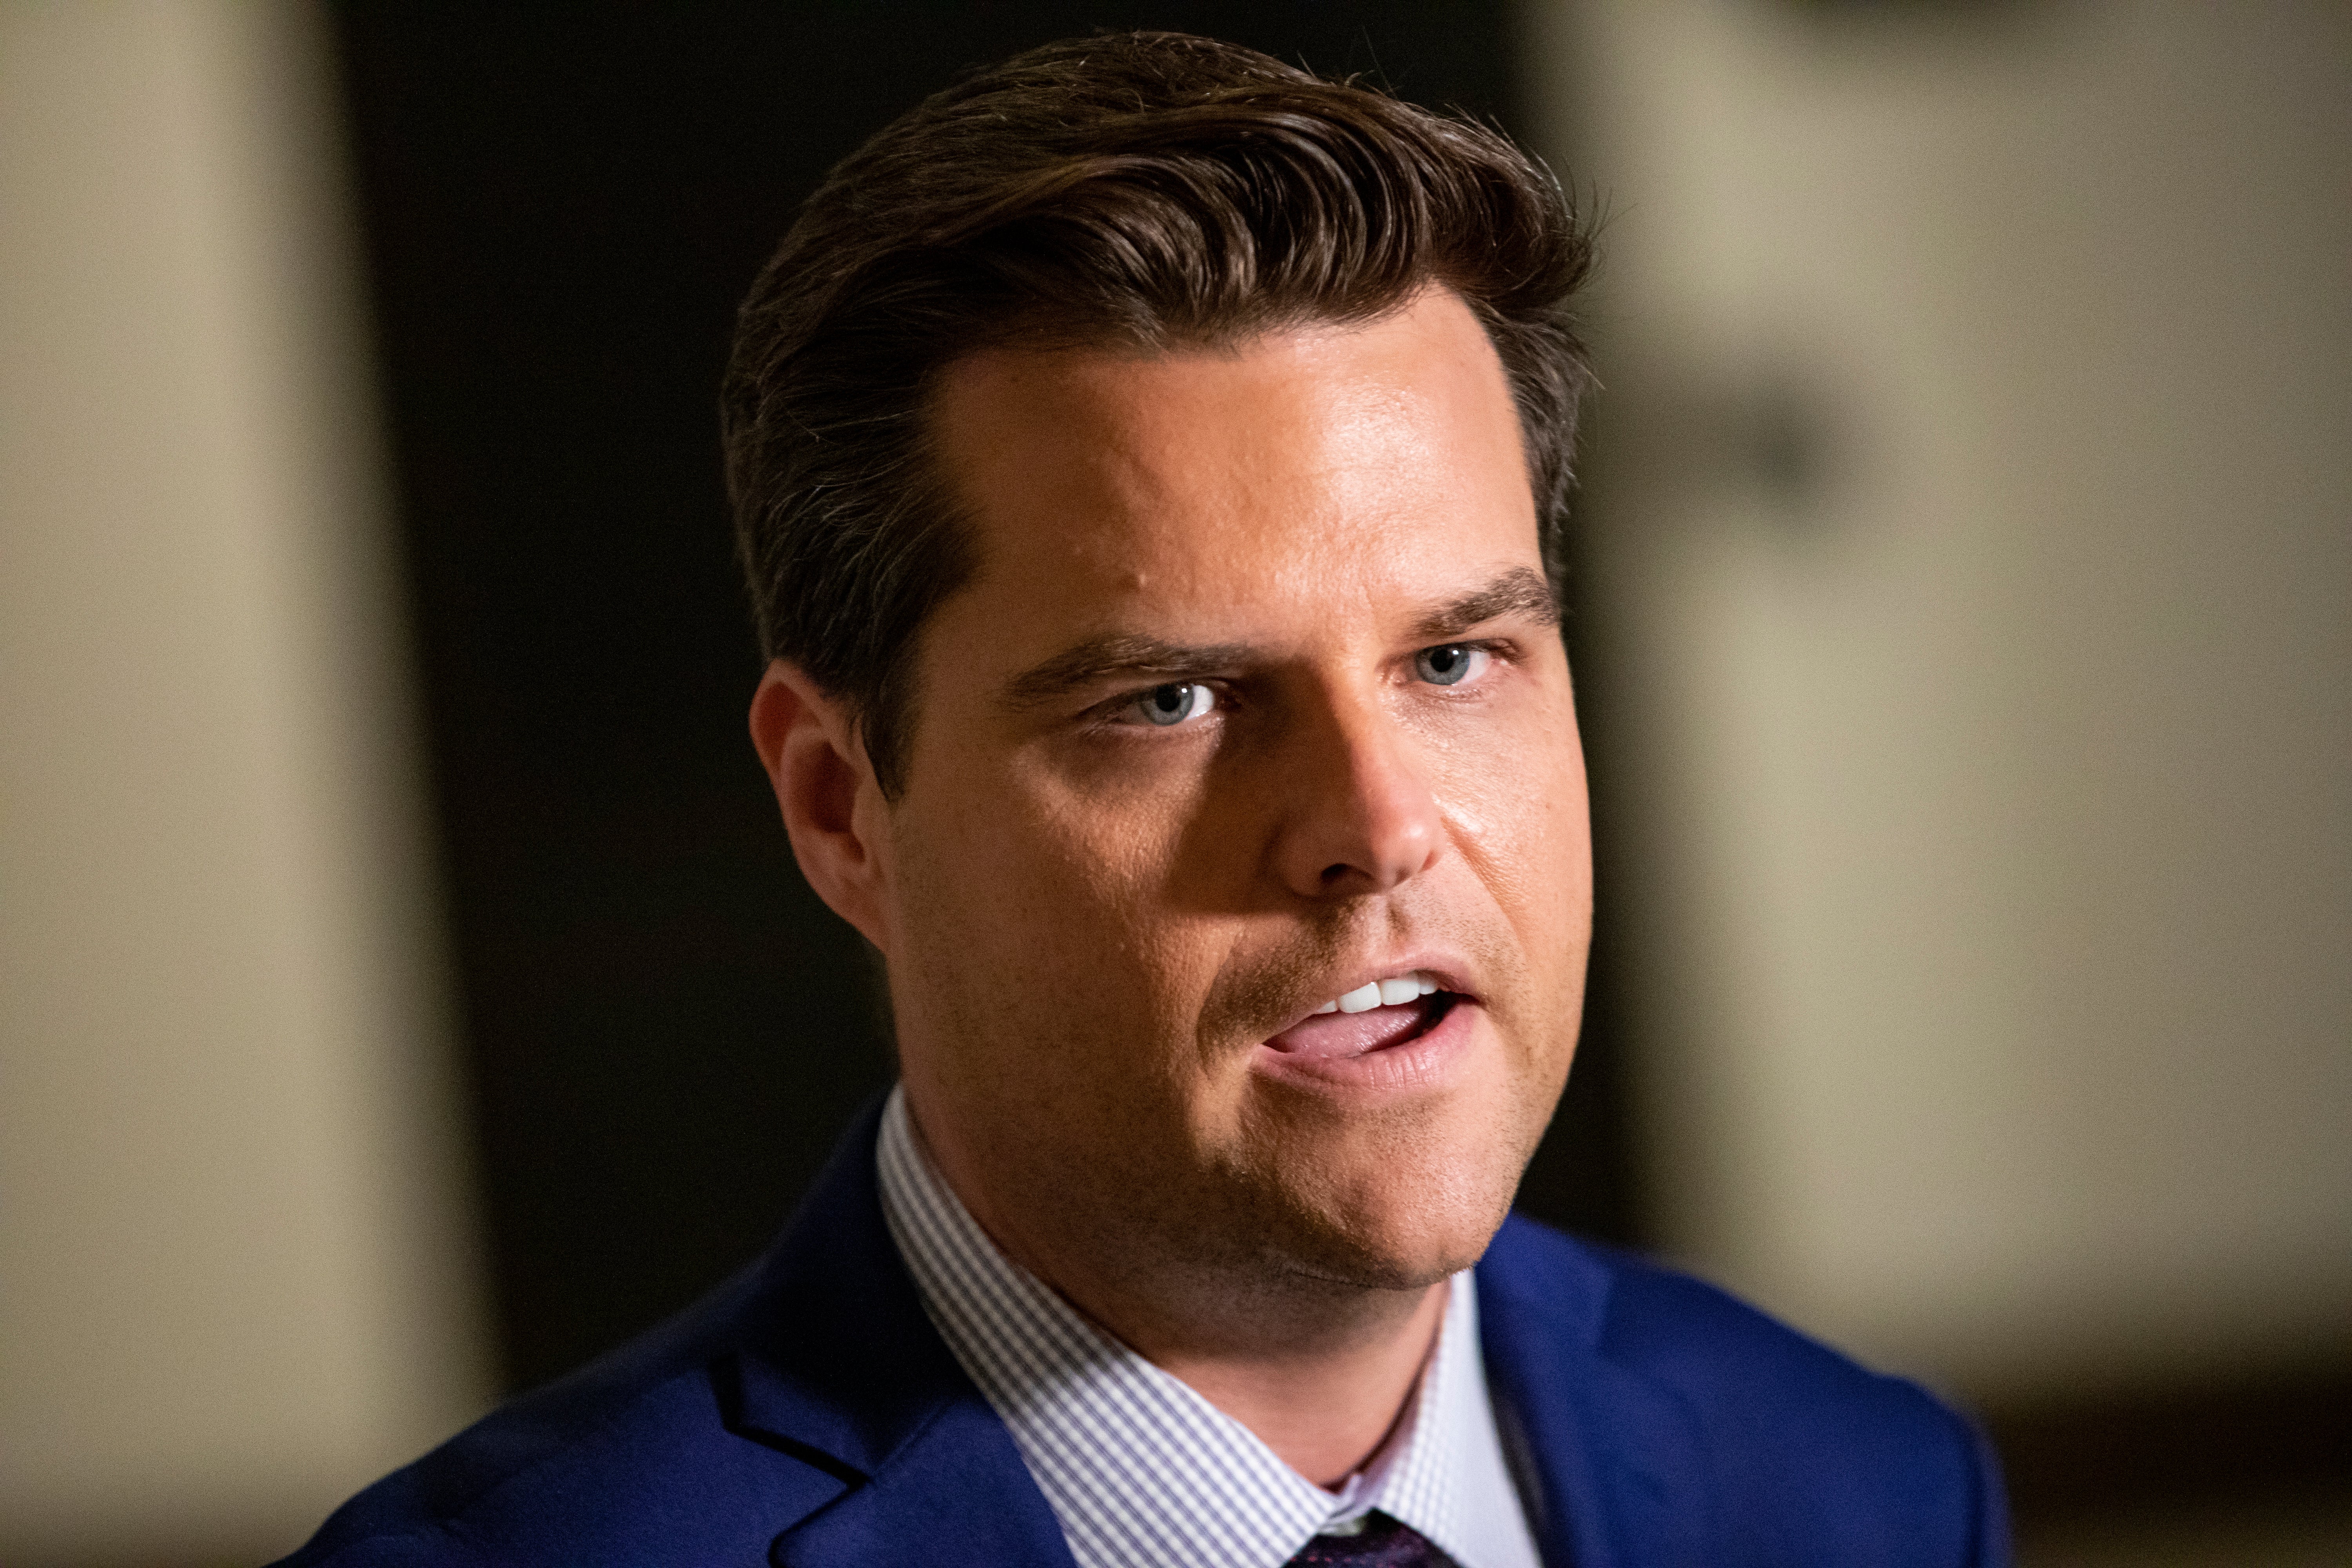 US Rep. Matt Gaetz (R-FL) speaks to the media outside of the Sensitive Compartmented Information Facility (SCIF) during the continued House impeachment inquiry against President Donald Trump at the US Capitol on 30 October, 2019, in Washington, DC